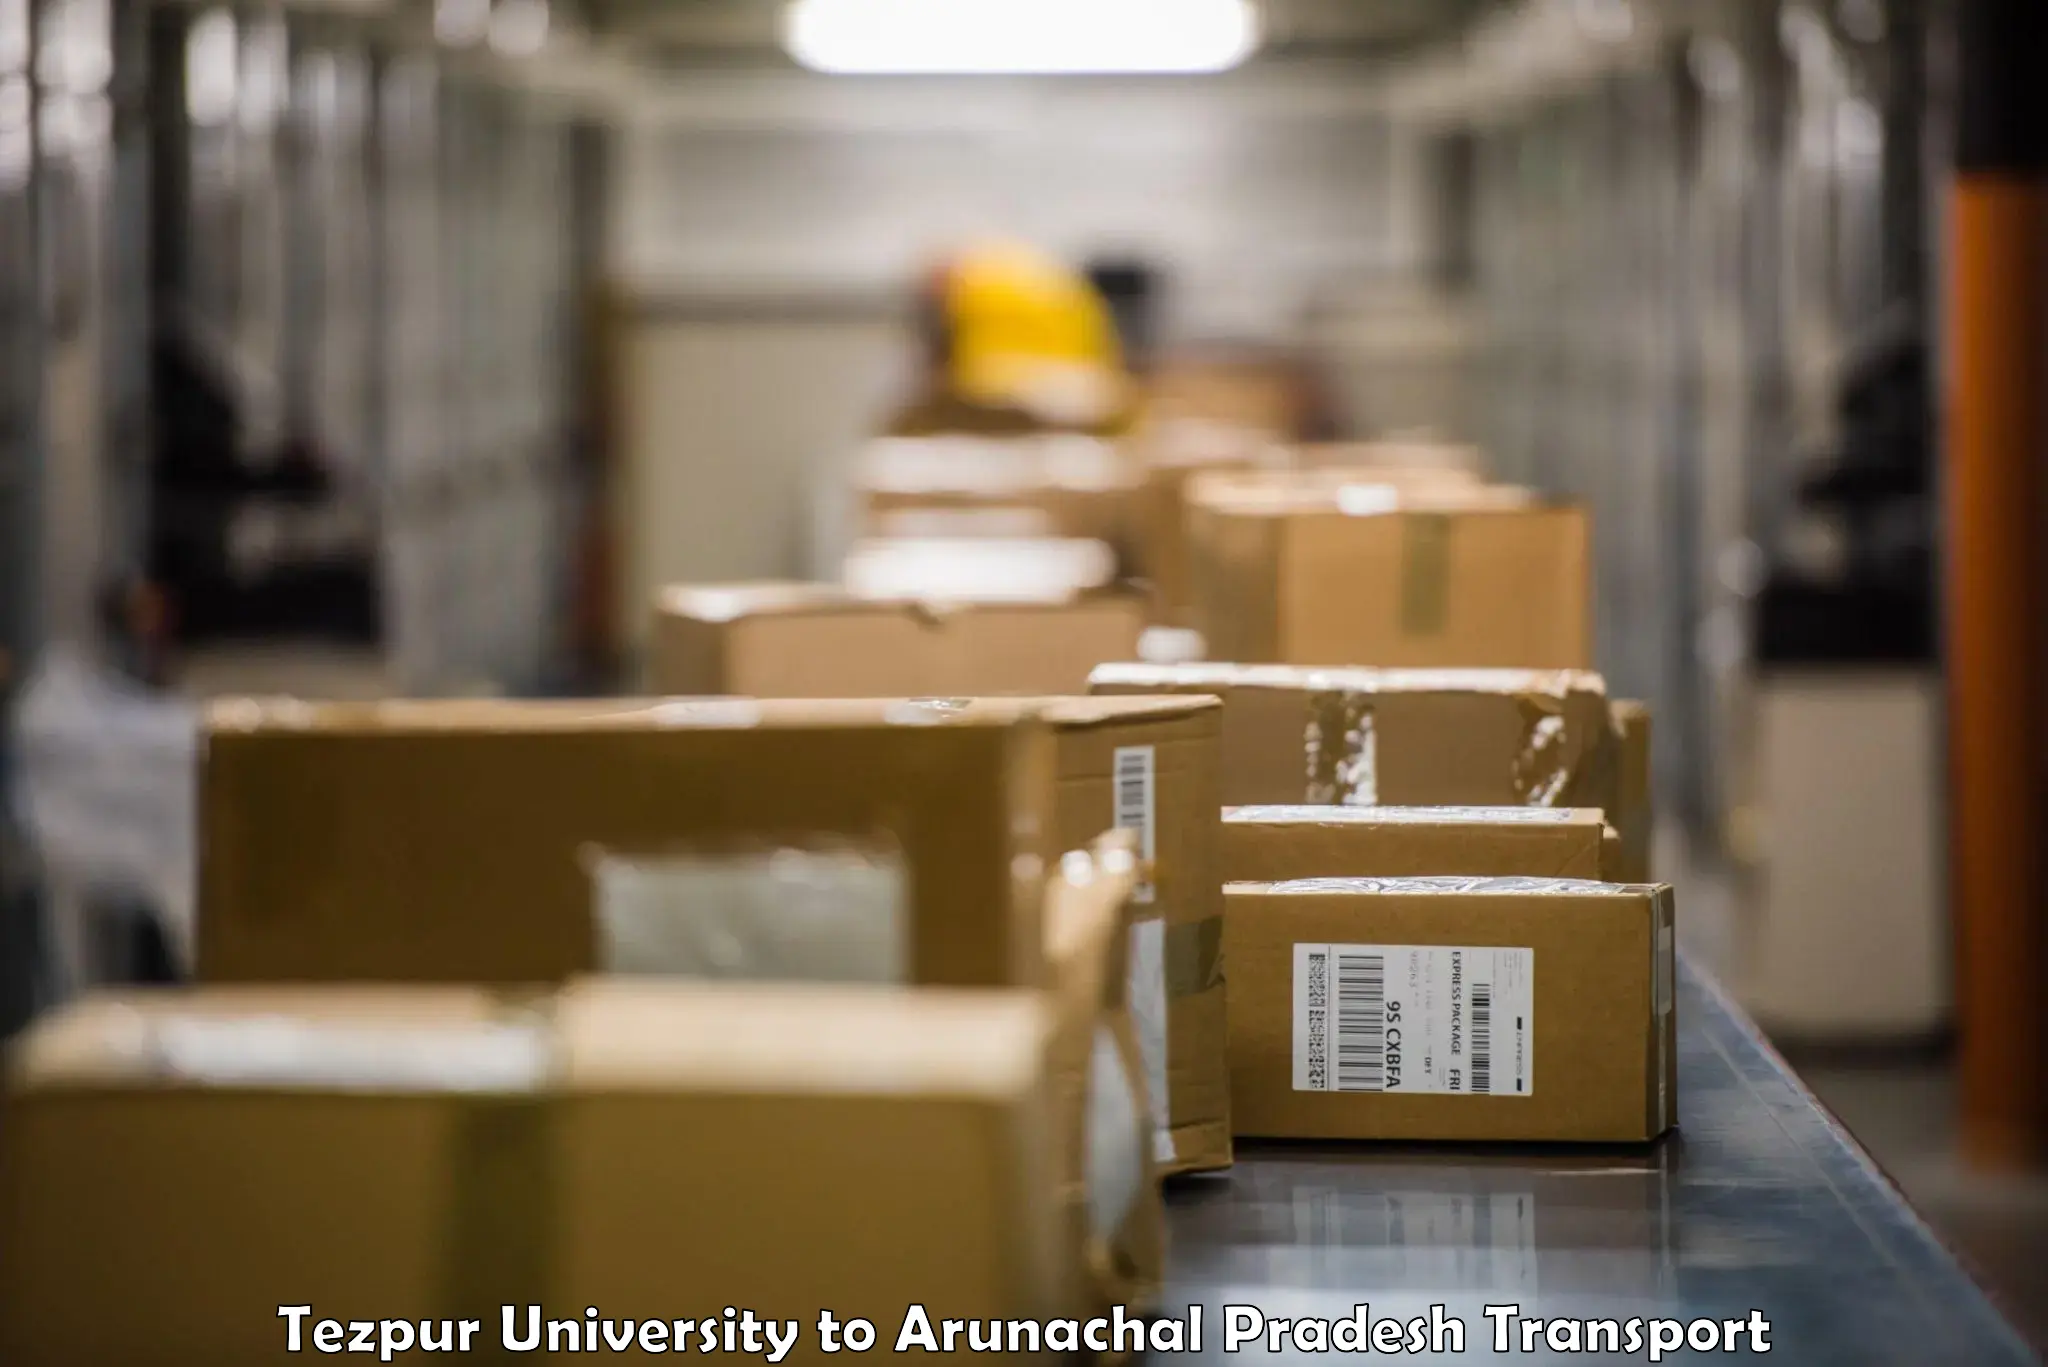 Truck transport companies in India Tezpur University to Pasighat